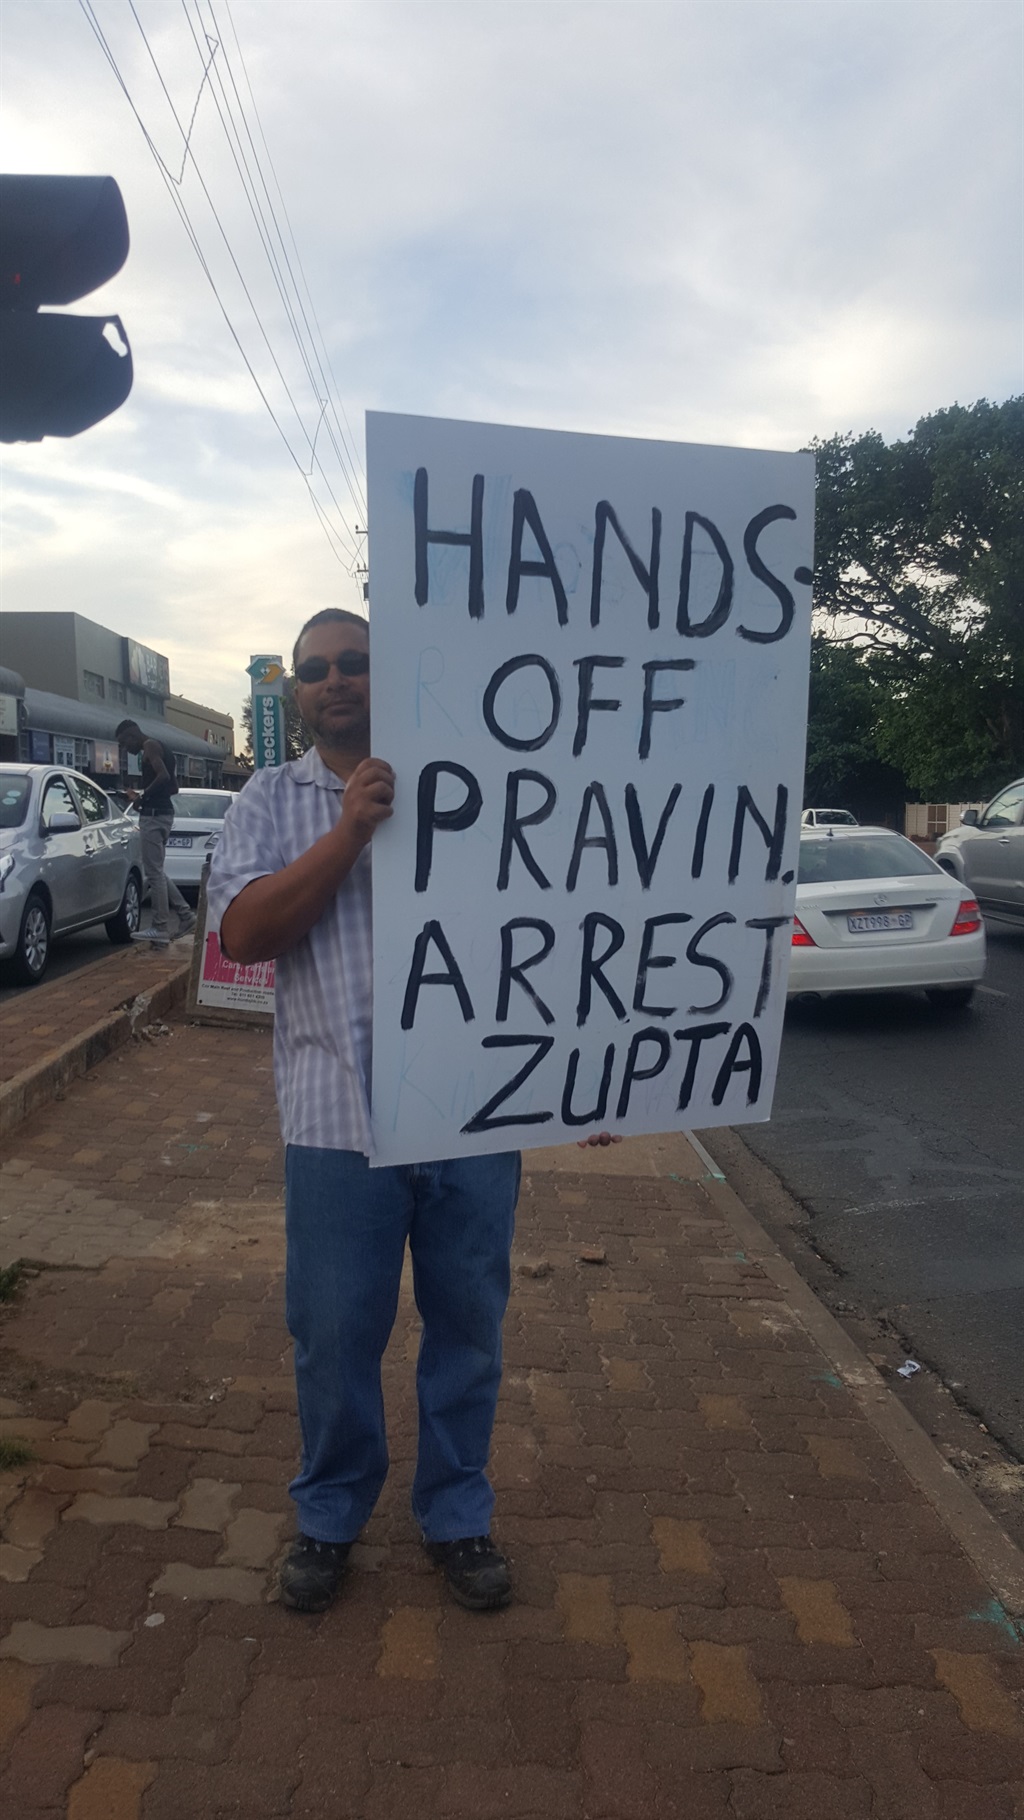 HANDS OFF PRAVIN ‘Peter’ is nearing the second day of his one-man picket in support of Finance Minister Pravin Gordhan  PHOTO: nICKI GULES 